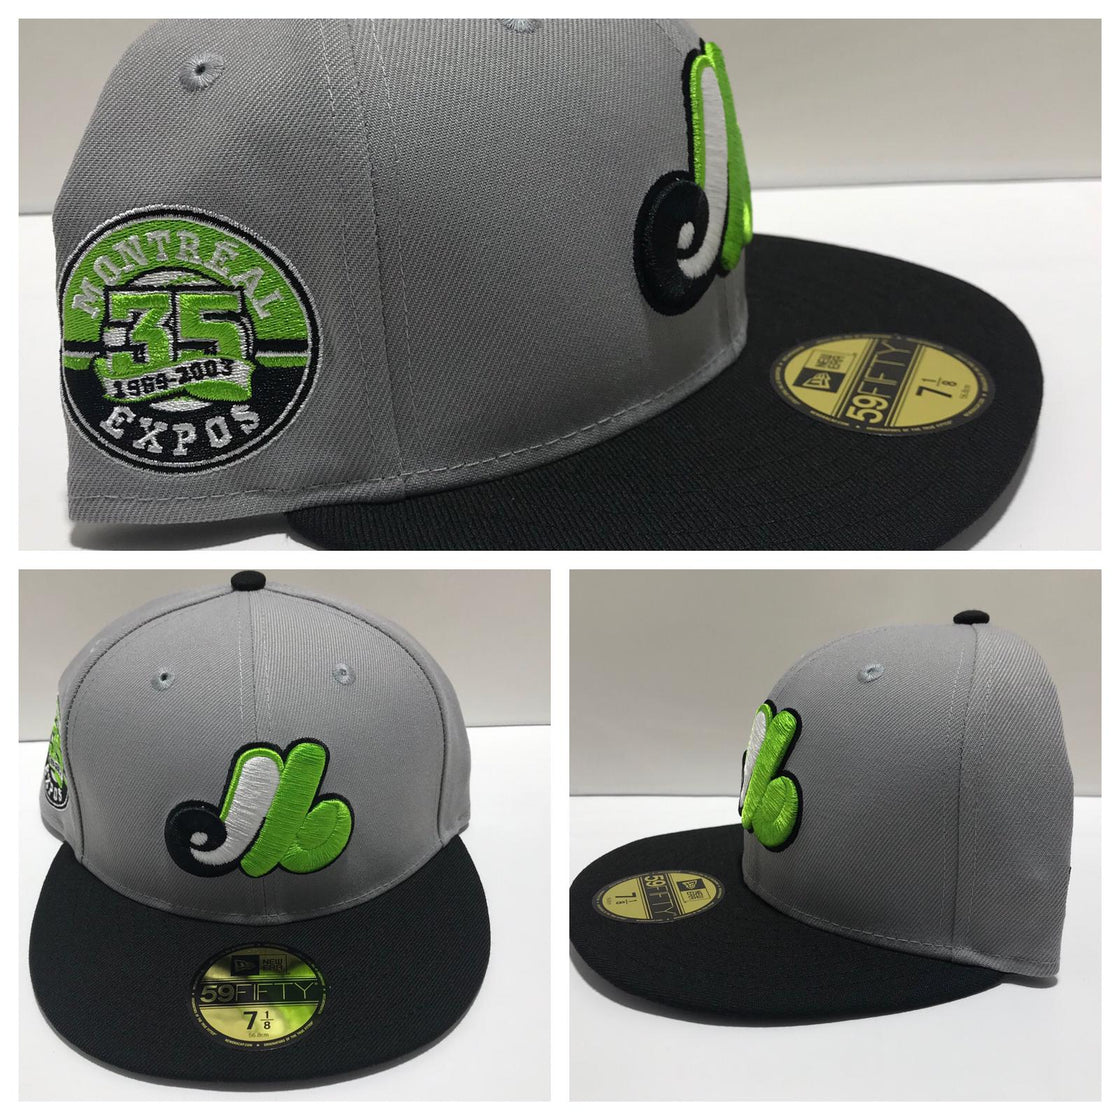 MONTREAL EXPOS NEW ERA FITTED 59FIFTY HAT LIGHT GRAY BLACK LIME GREEN